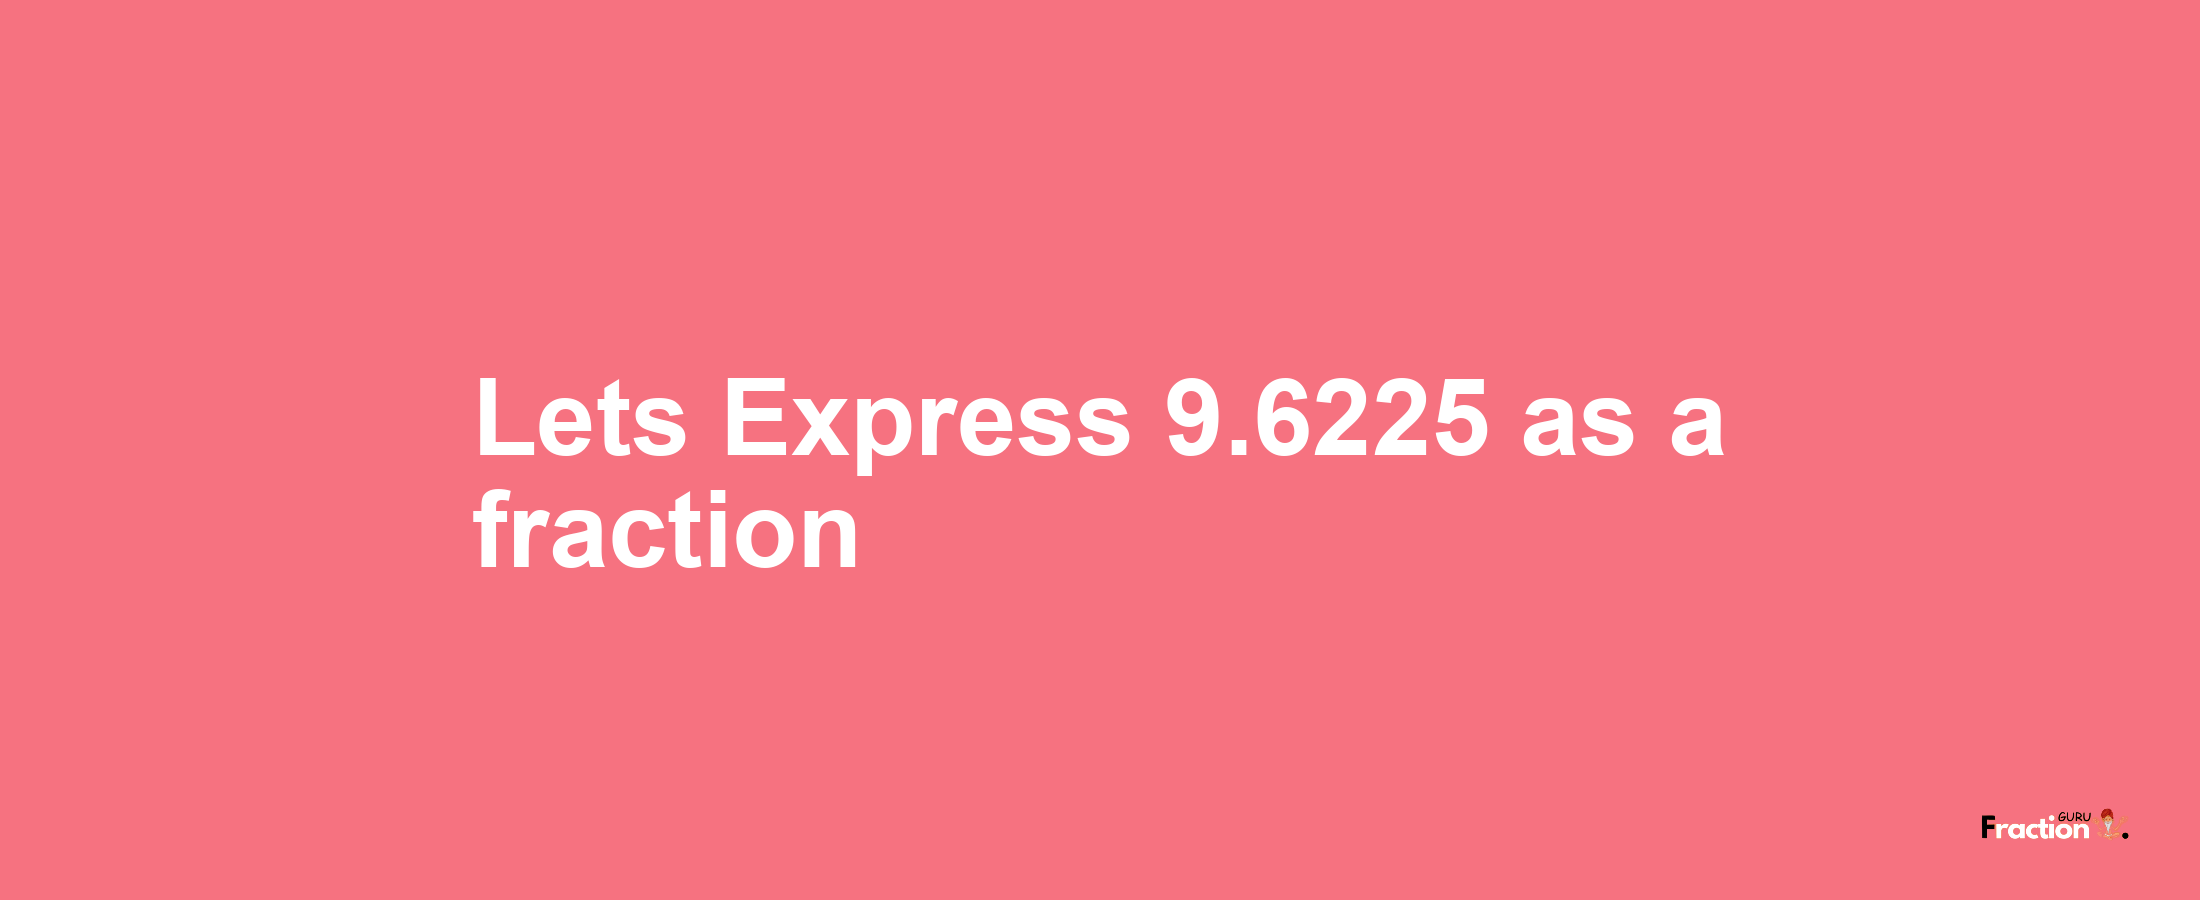 Lets Express 9.6225 as afraction